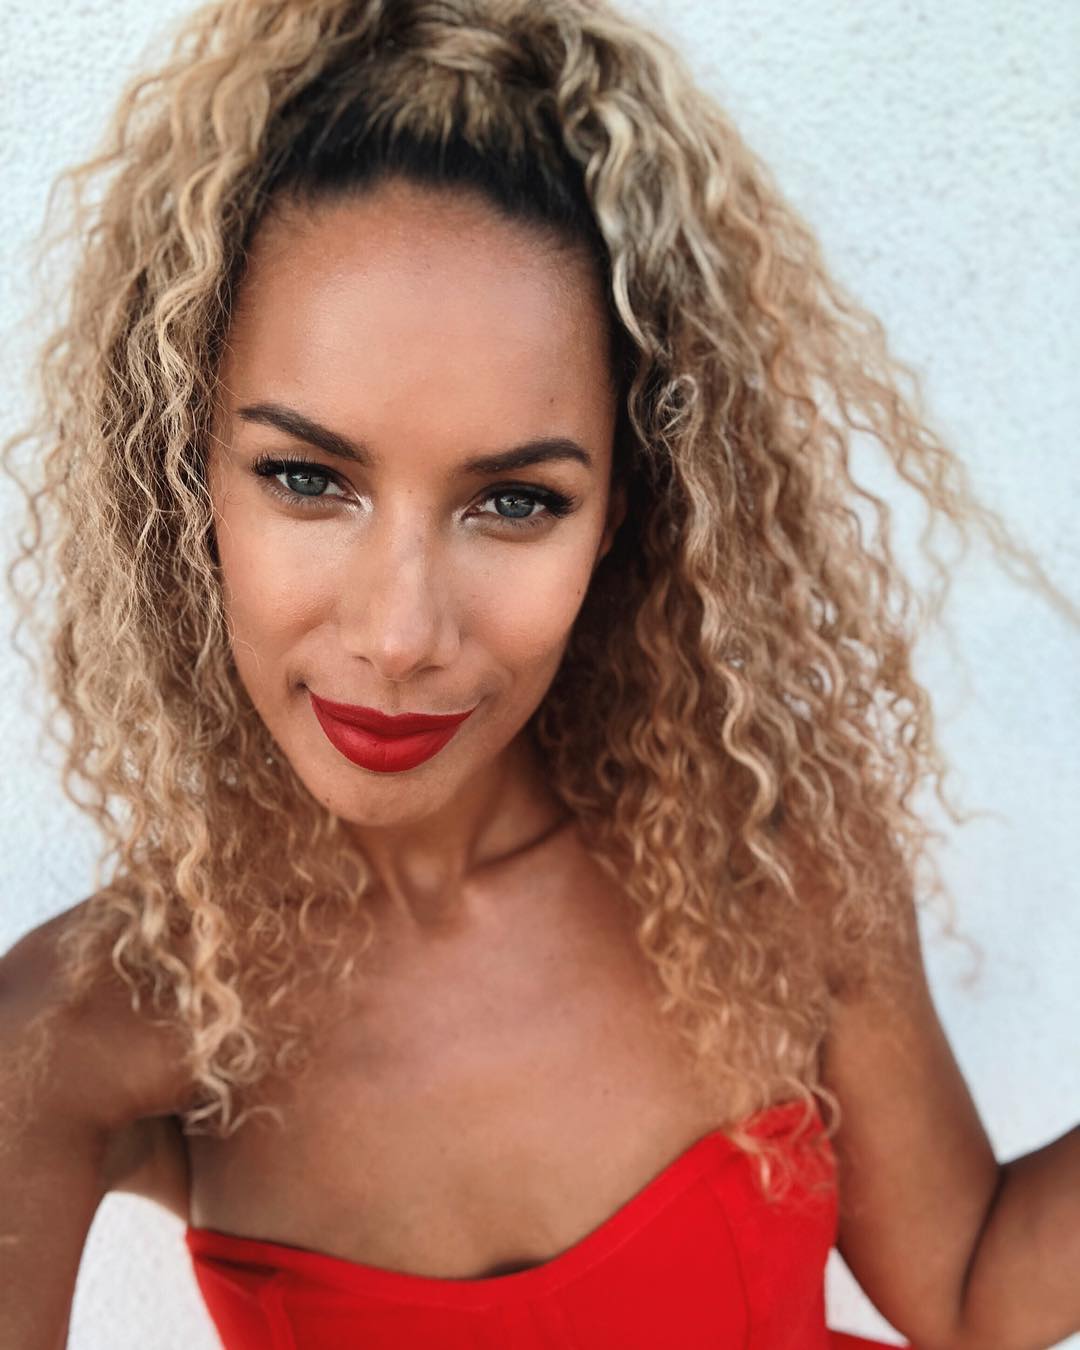 49 Hot Pictures Of Leona Lewis Are Delight For Fans | Best Of Comic Books